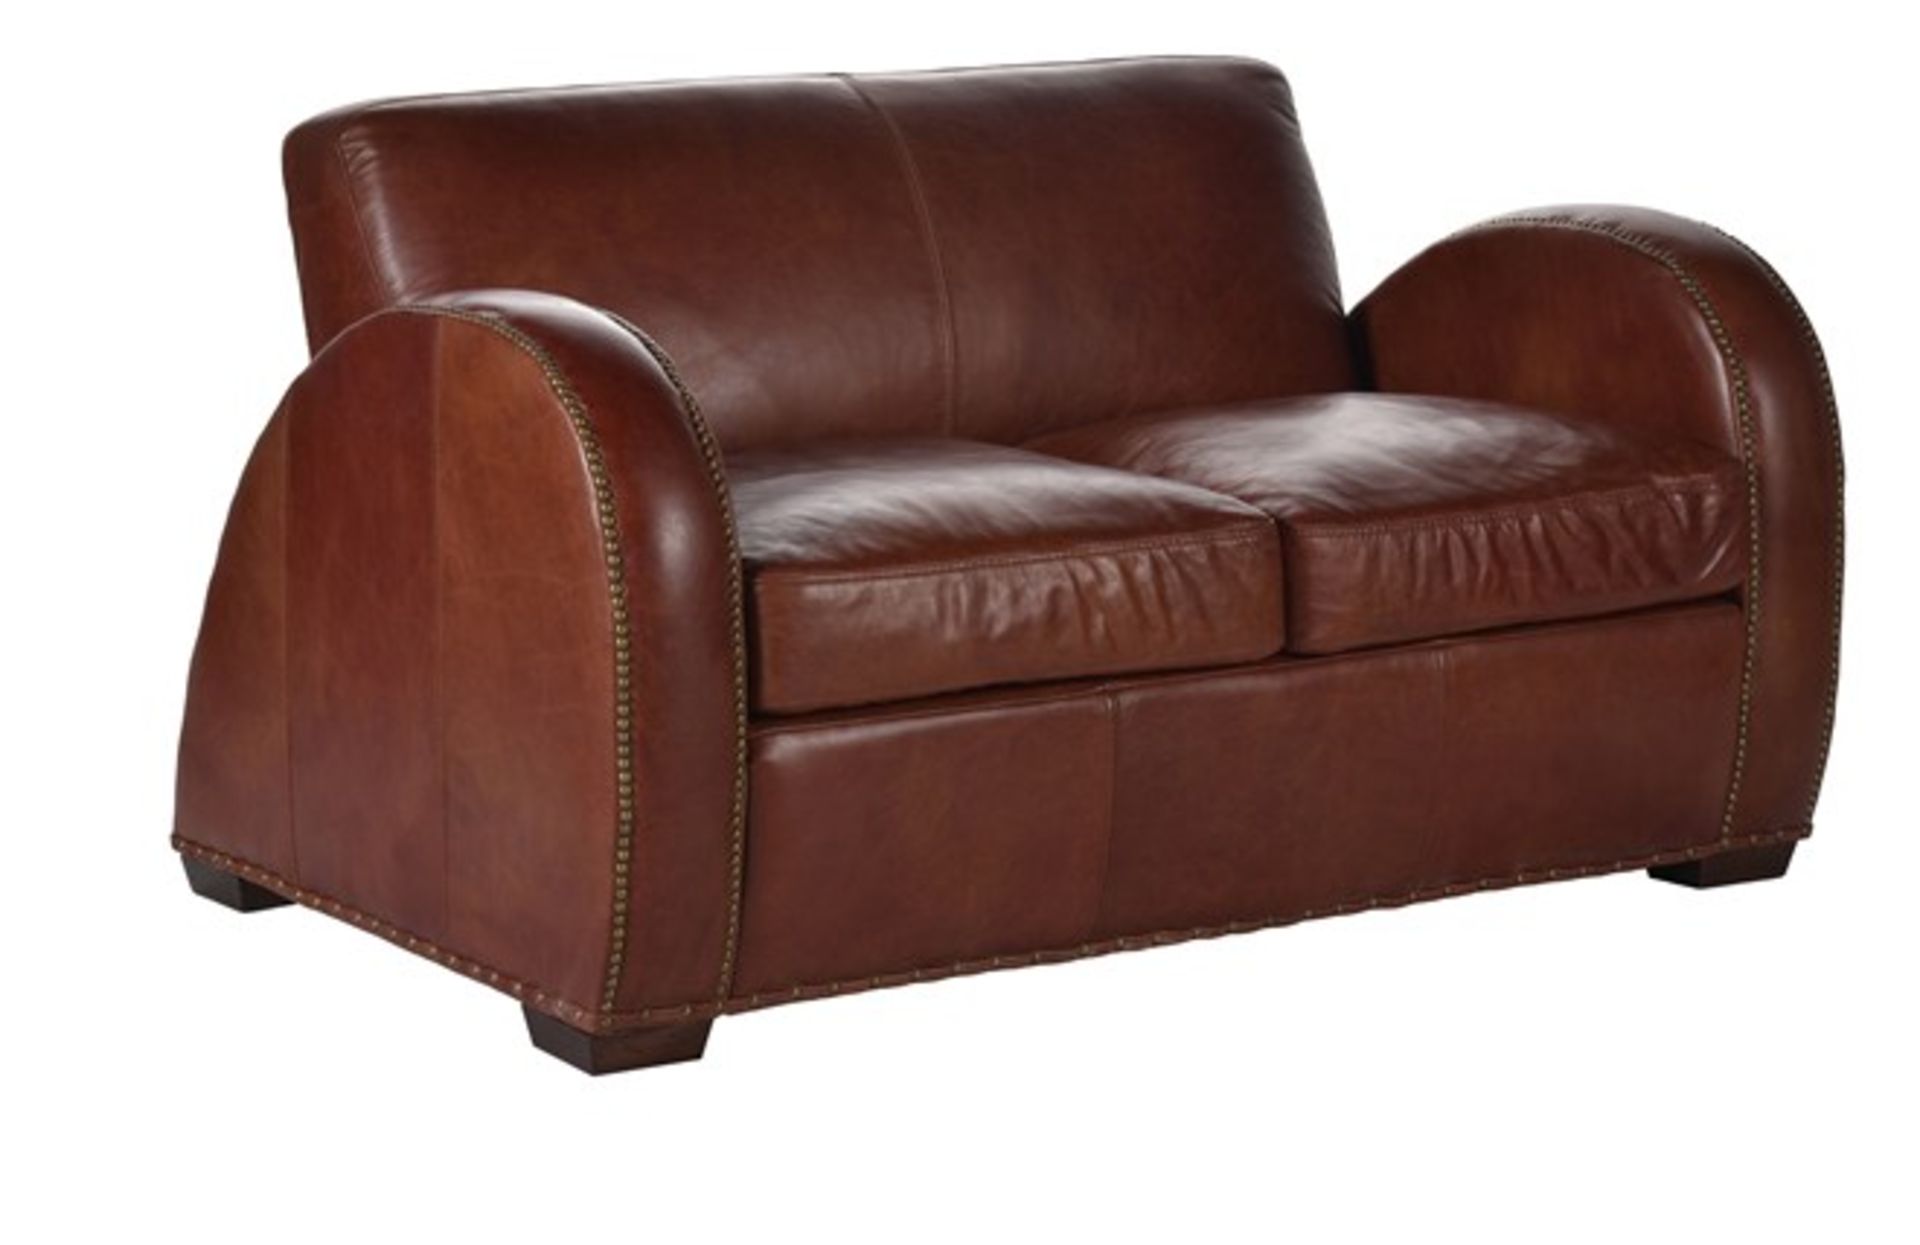 French Deco Sofa 2 Seater Ride Mocca Leather Part Of The Brand’s French Deco Collection, Which - Image 2 of 2